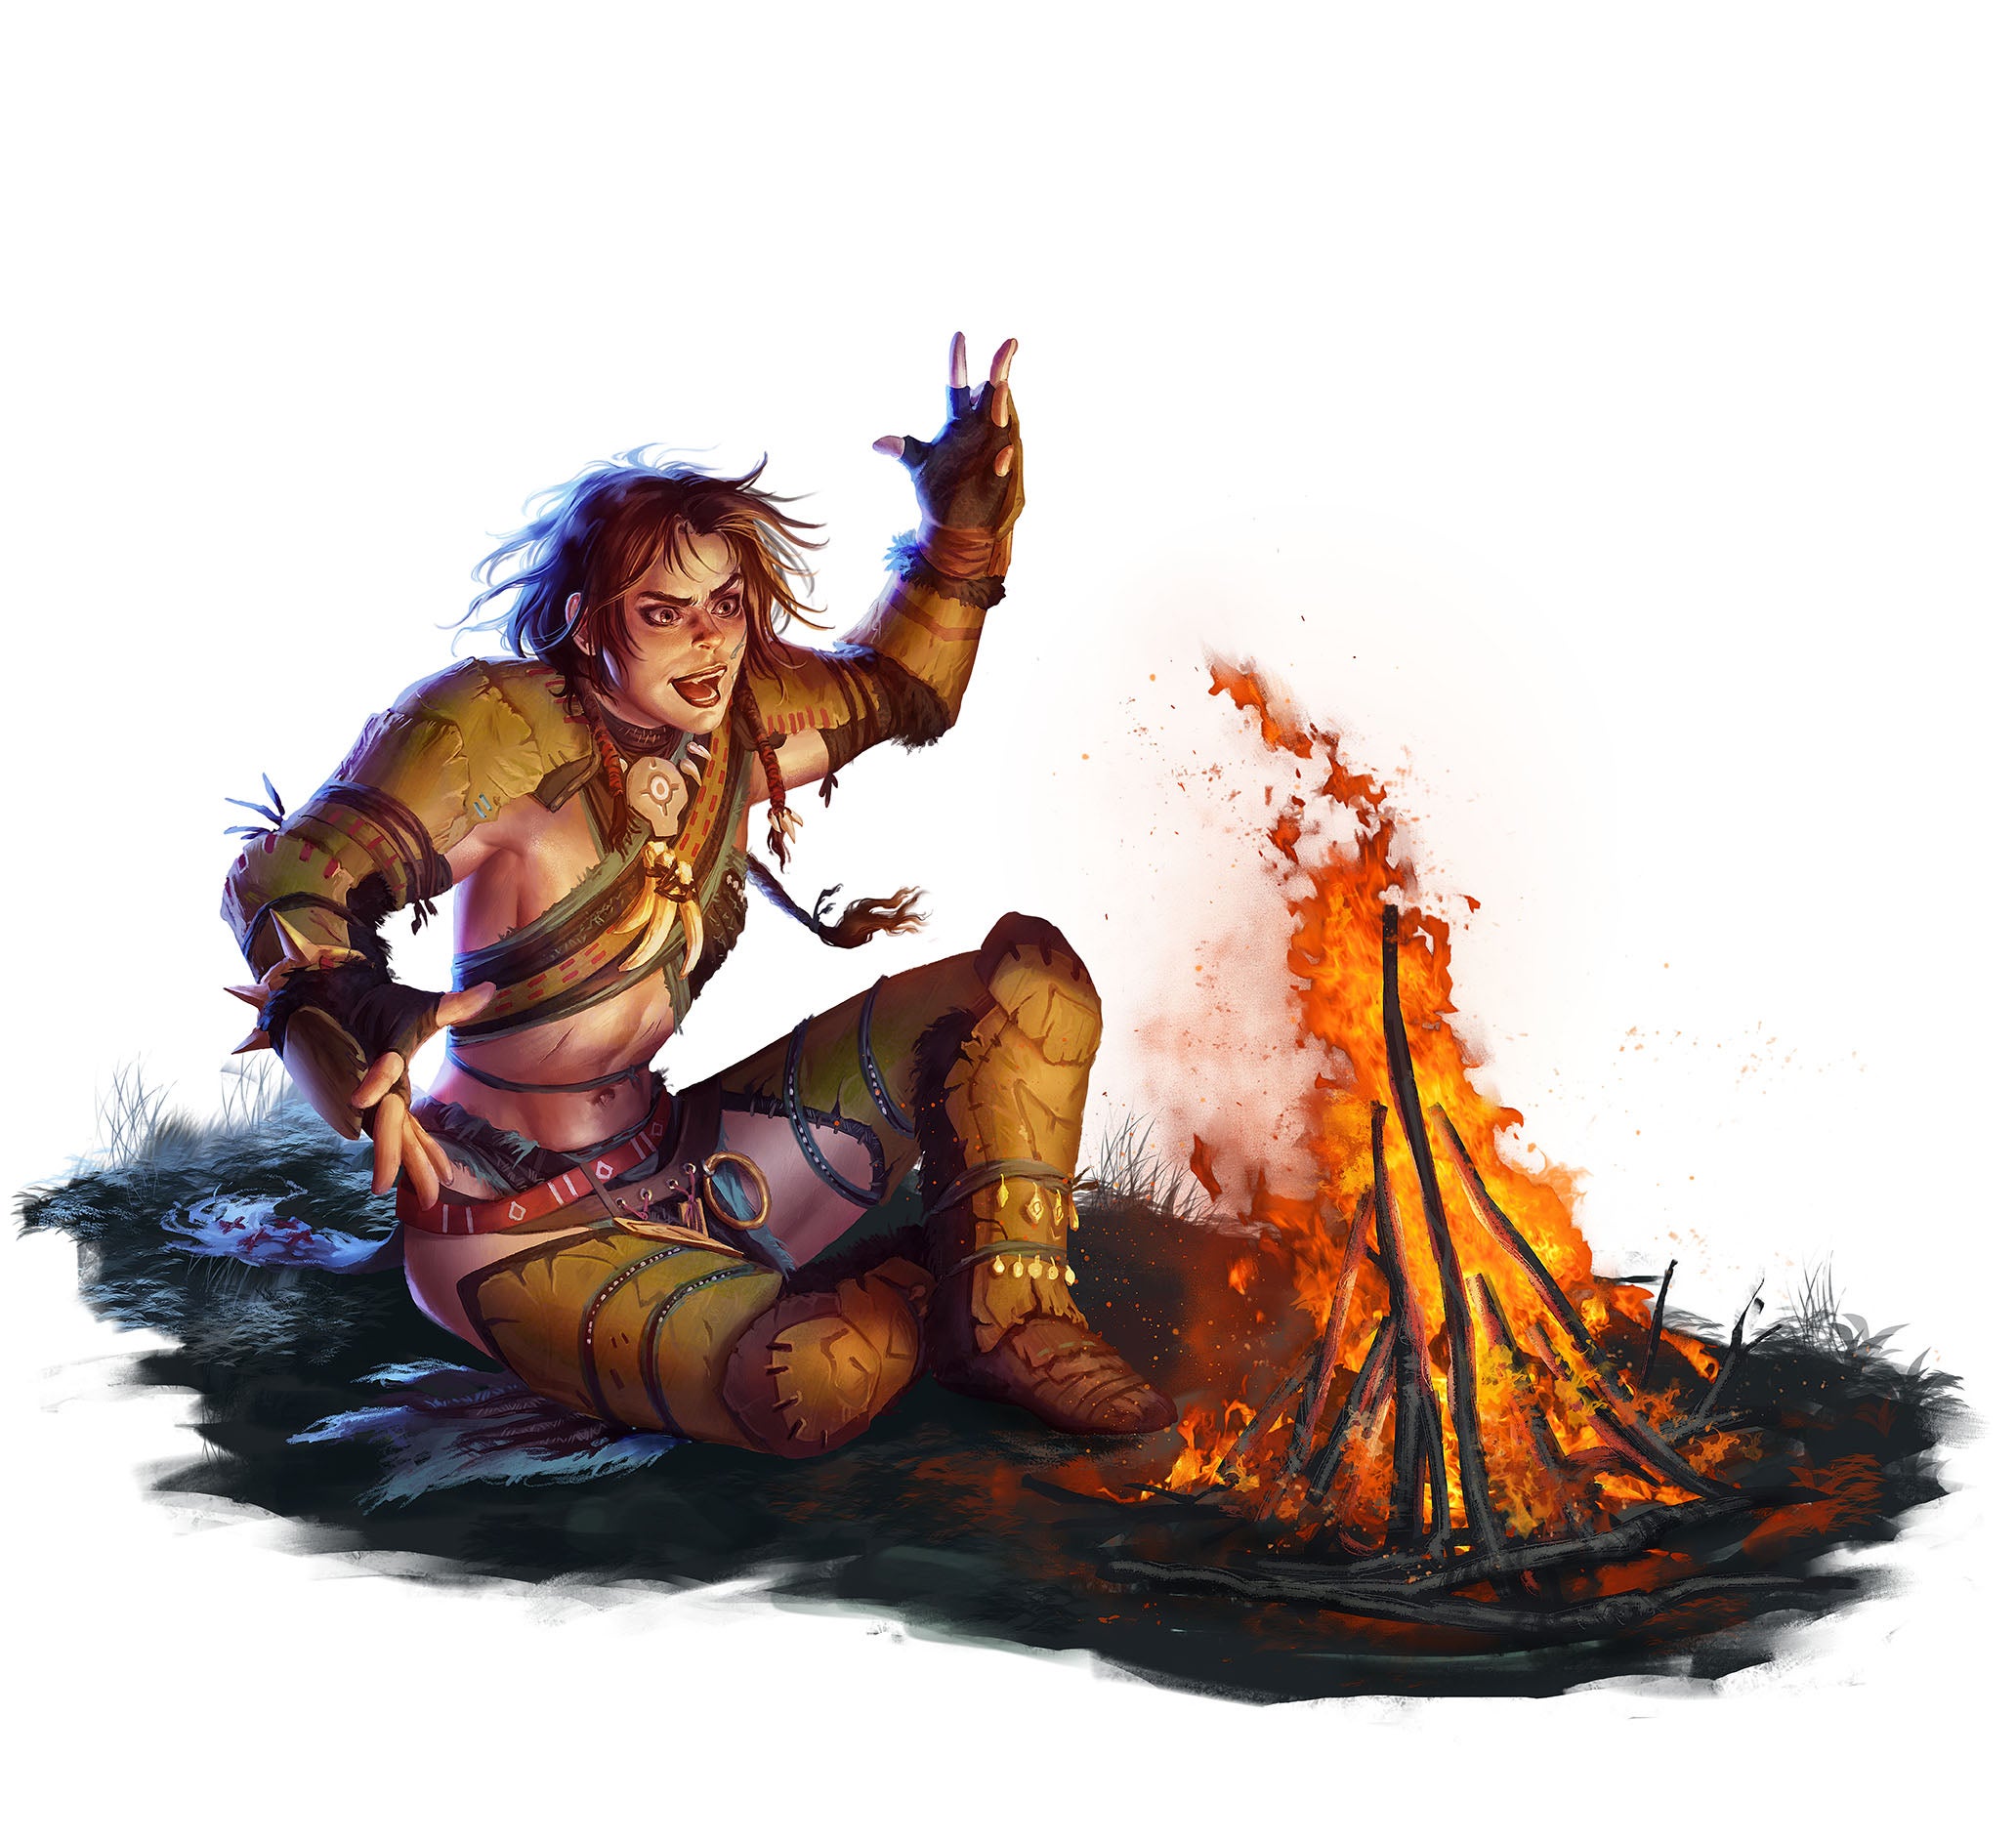  Iconic barbarian, Amiri, sits in the light of a campfire animatedly telling a story.